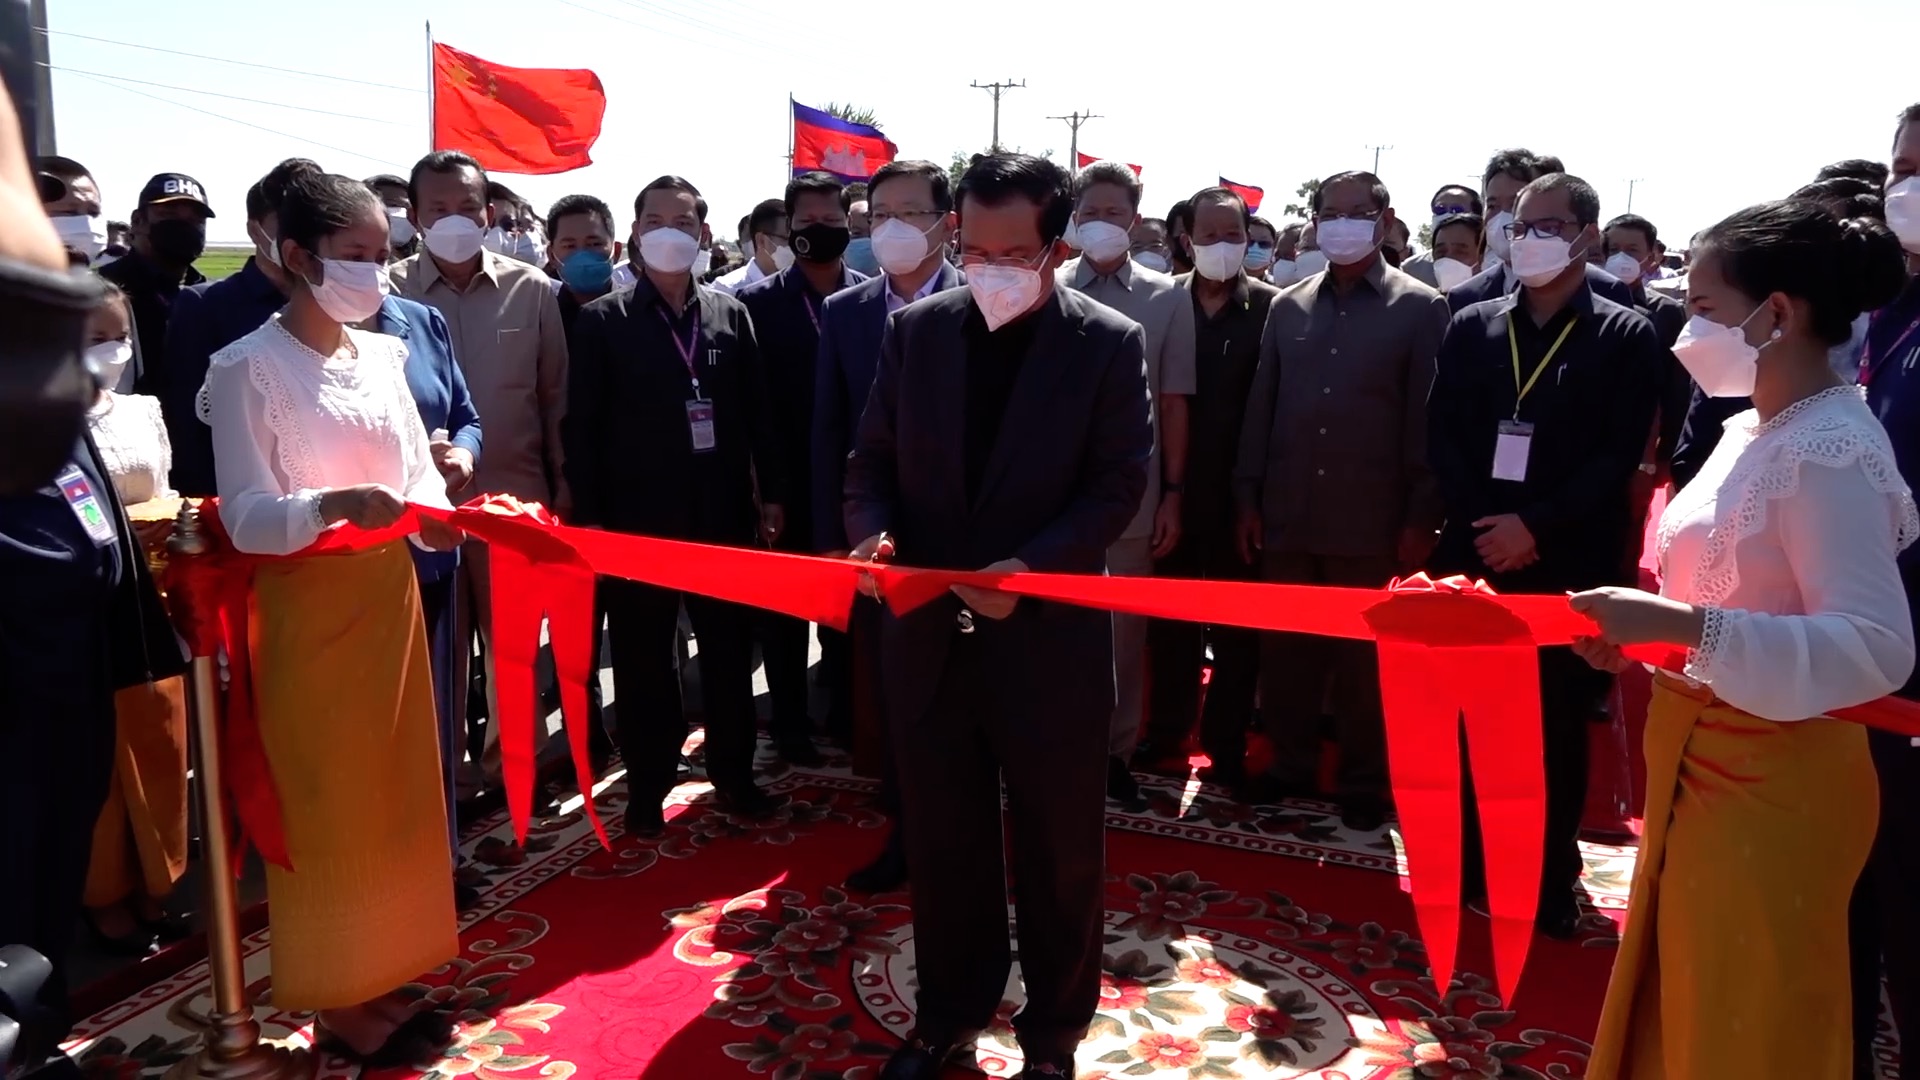 GLOBALink | Chinese-built national road inaugurated in Cambodia